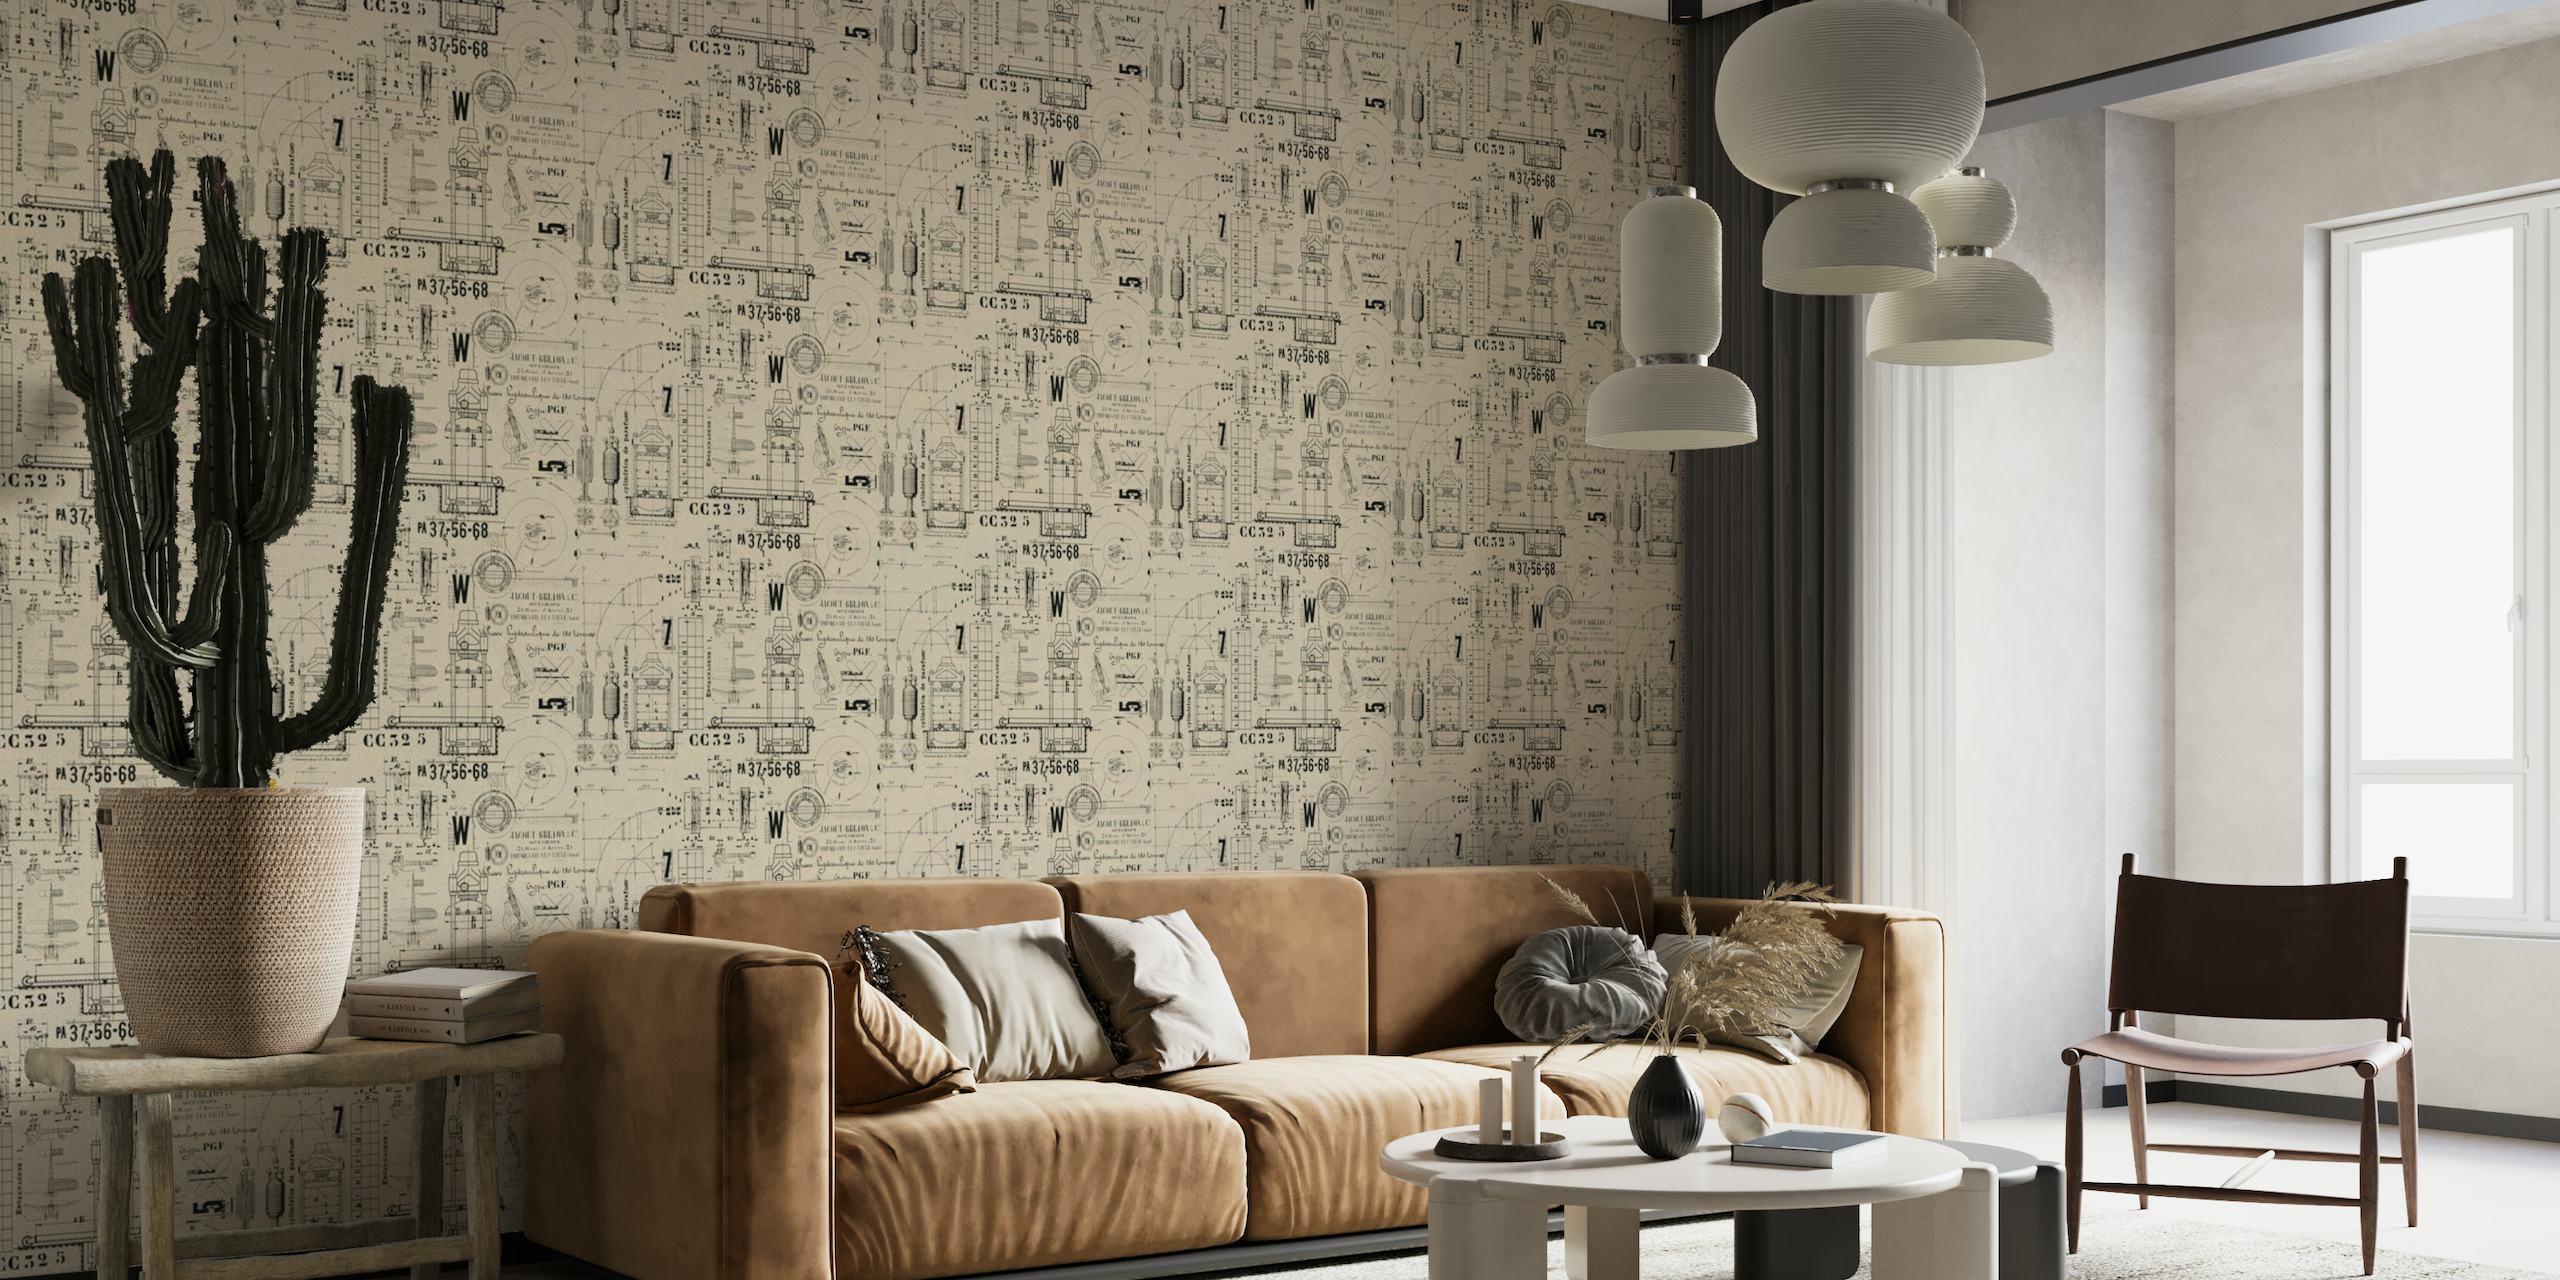 Vintage technical blueprint wall mural with beige background and black details